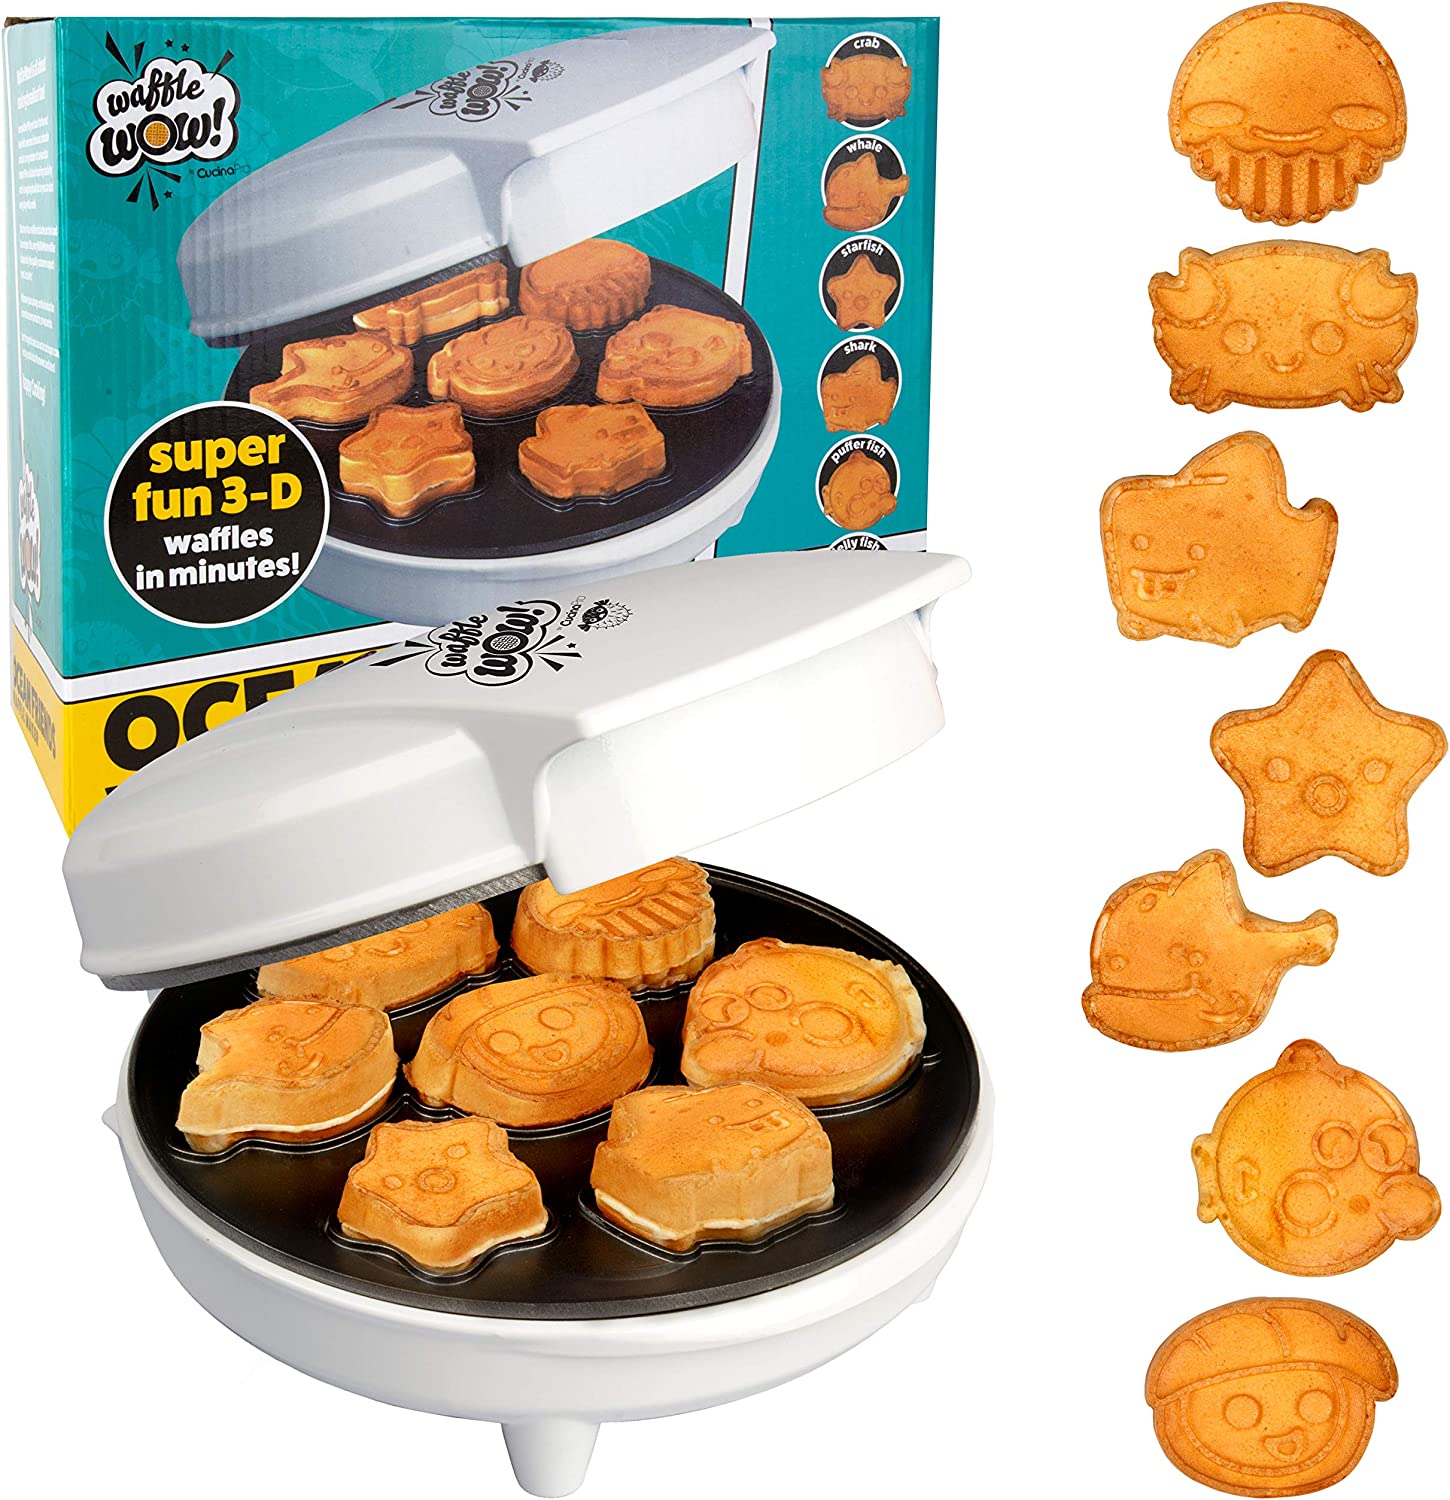 A sea creature waffle maker plus the box which the waffle maker comes in. There are 7 cooked examples of the waffles the machine makes next to the packaging and waffle maker itself.